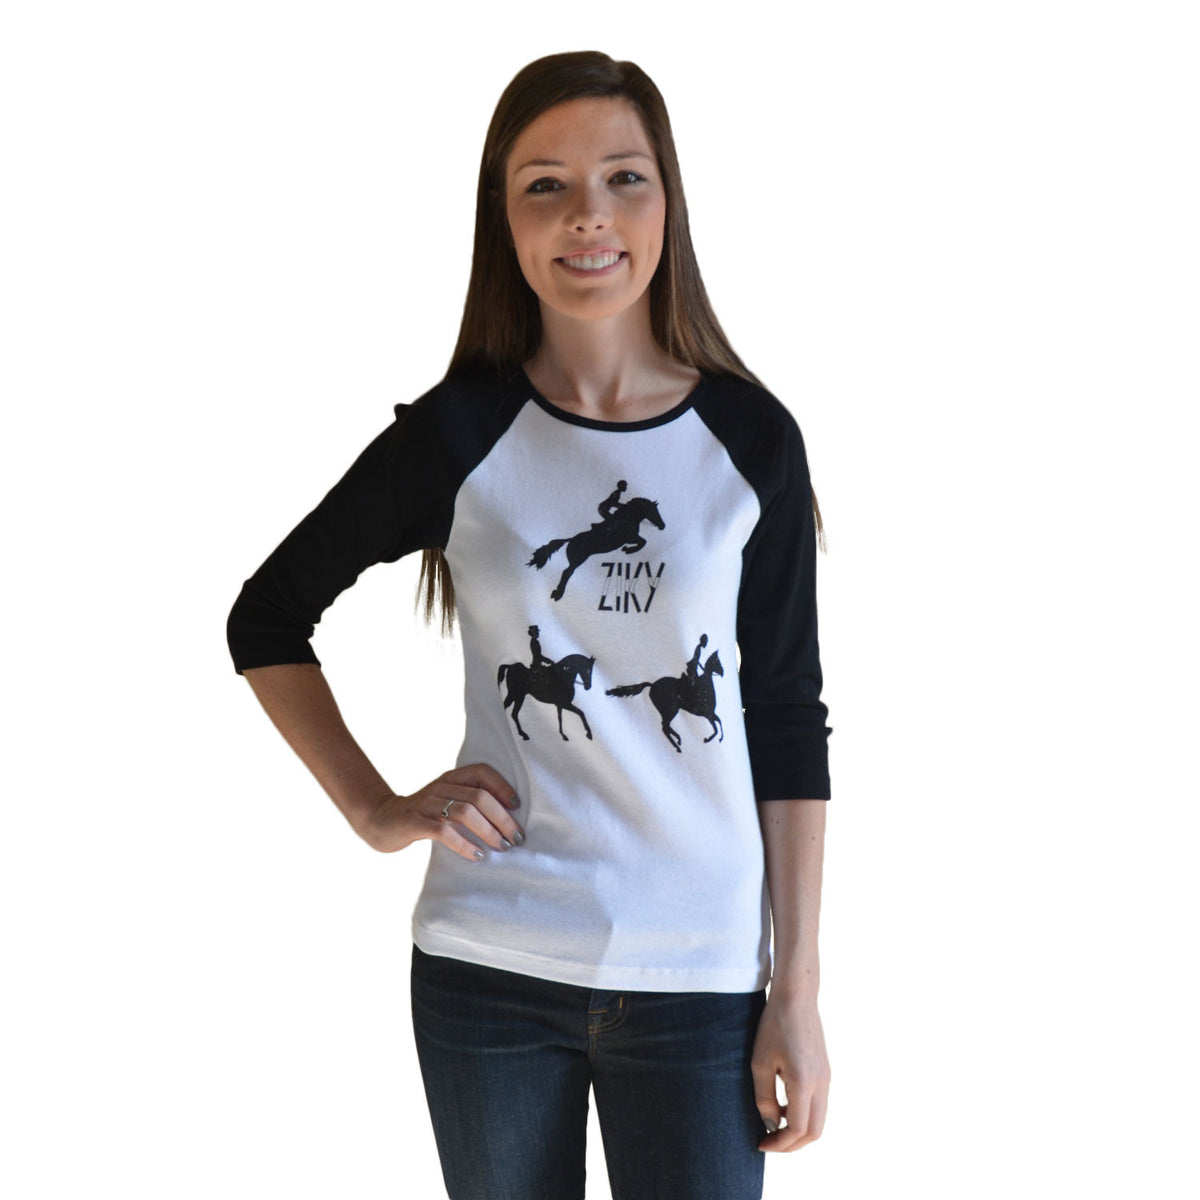 Eventing Rugby Shirt – ZIKYboutique